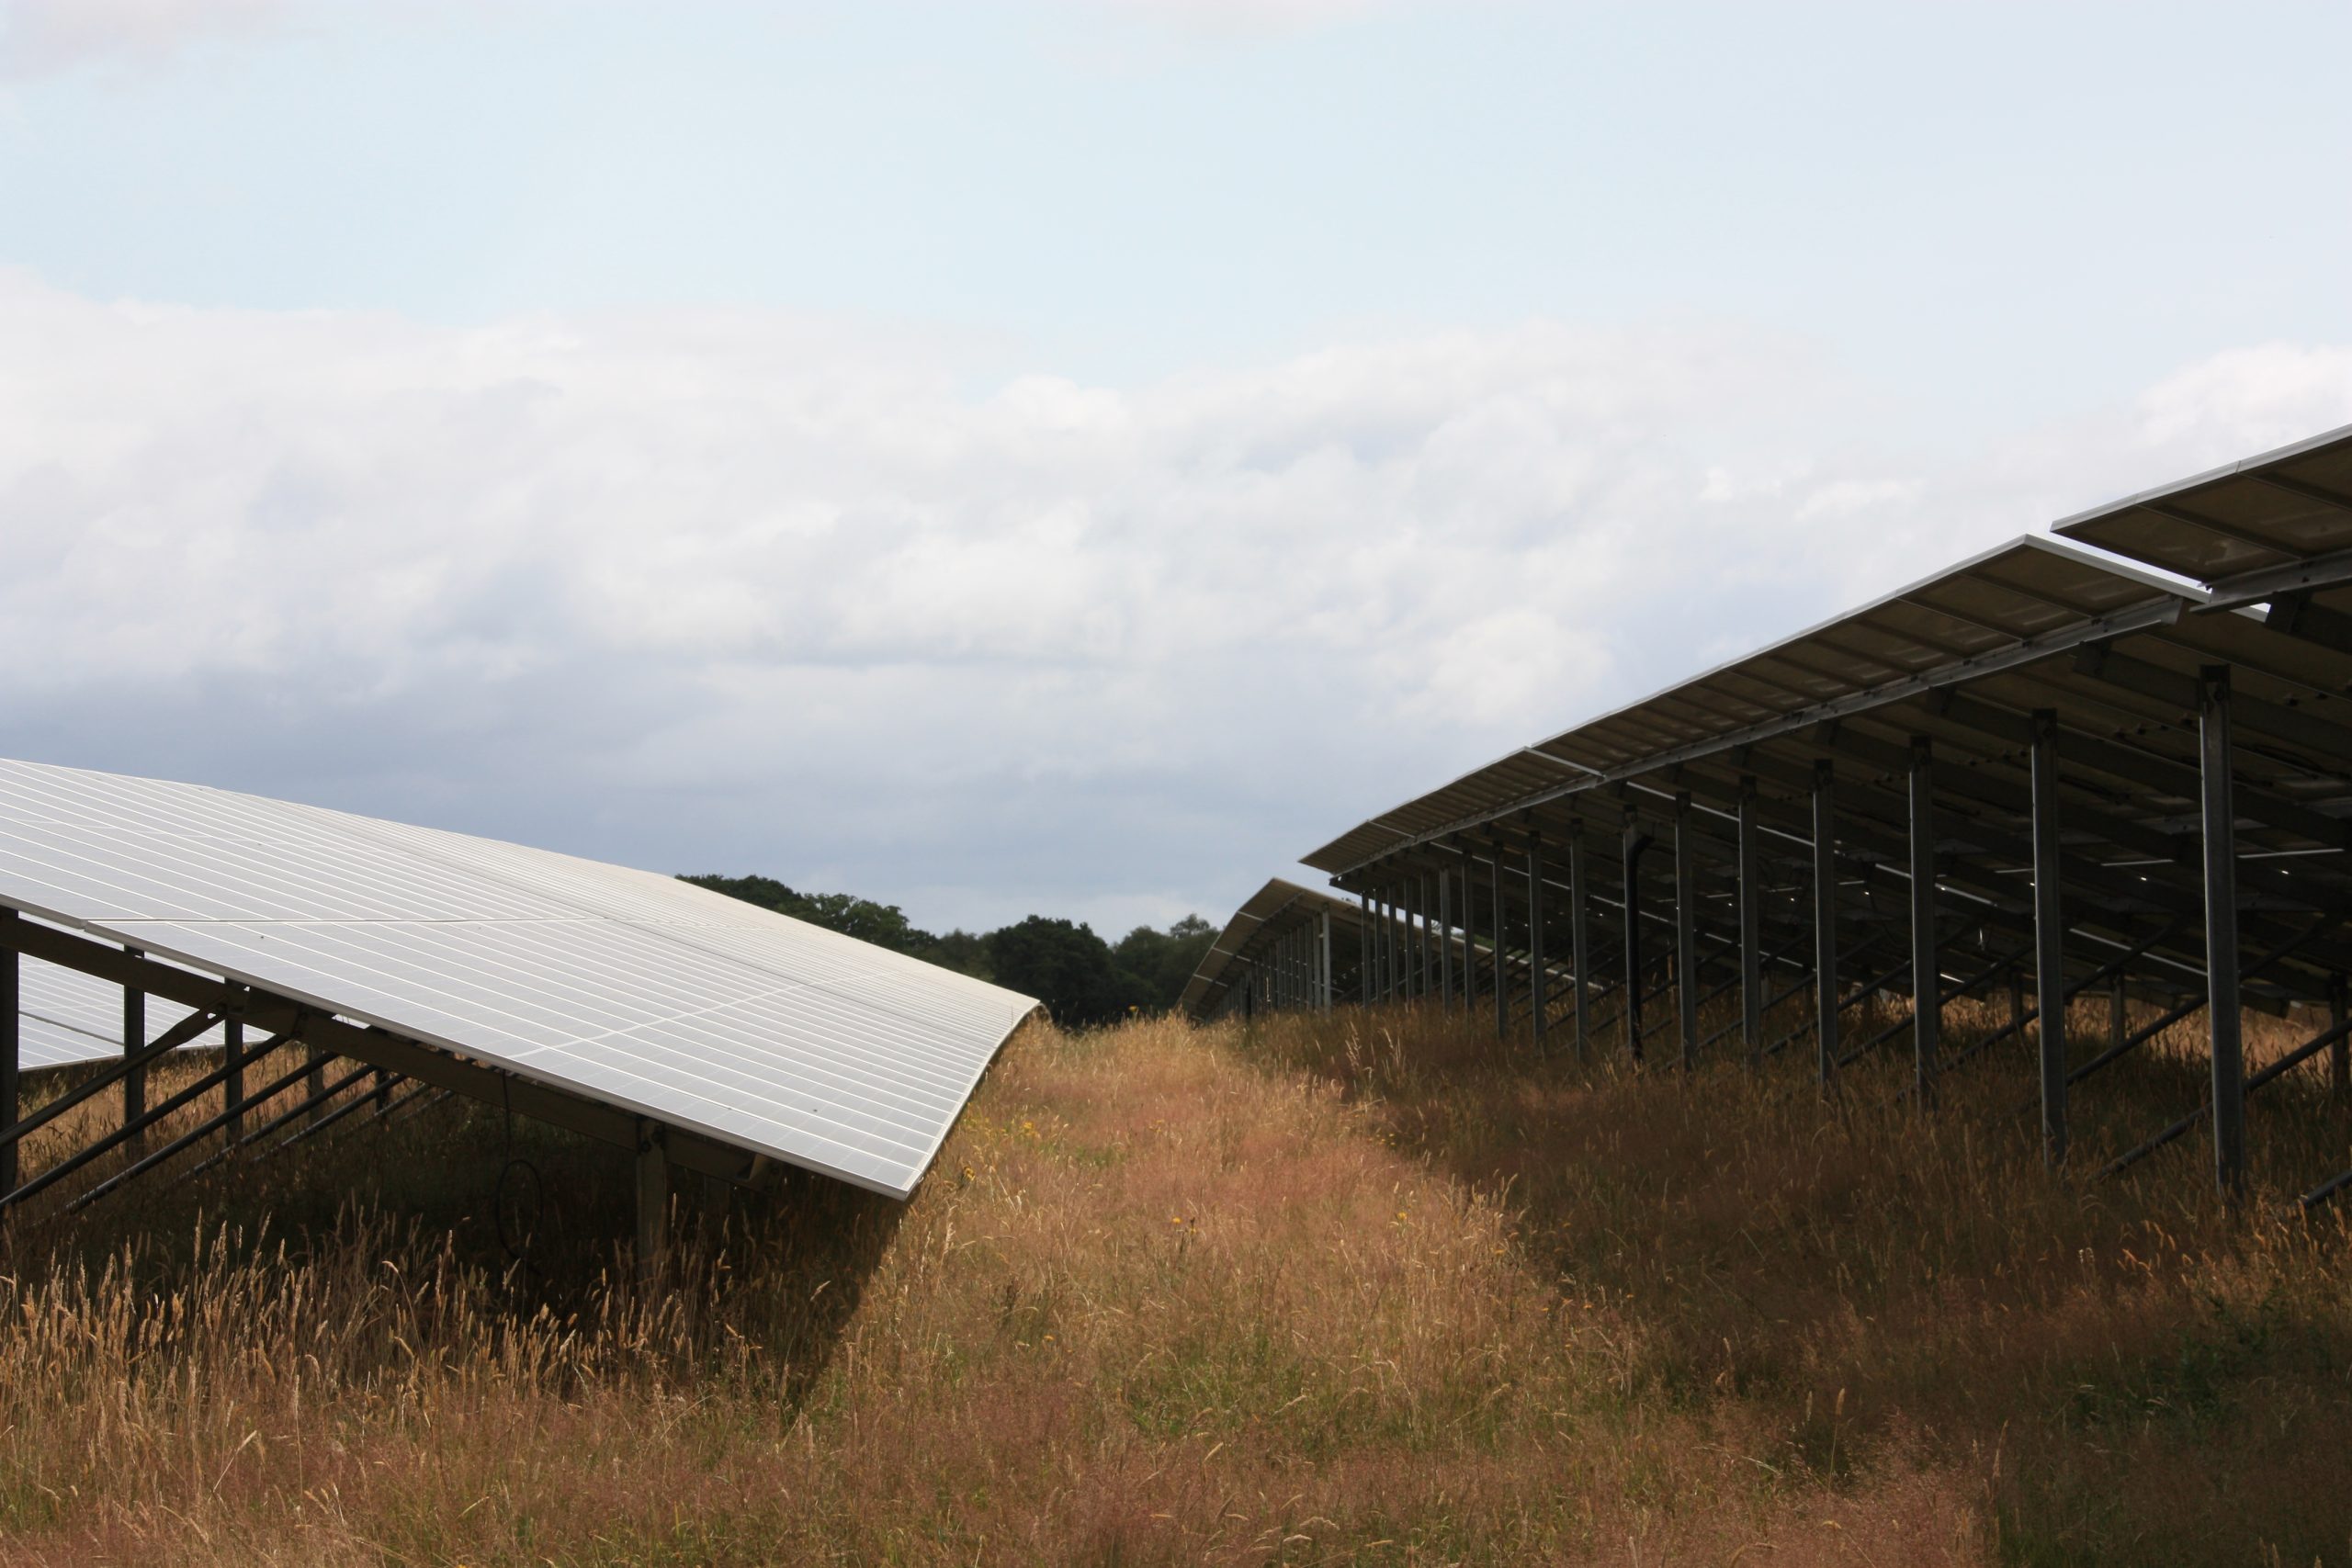 PS Renewables and Ørsted launch new solar farm that could power more than 200,000 homes annually